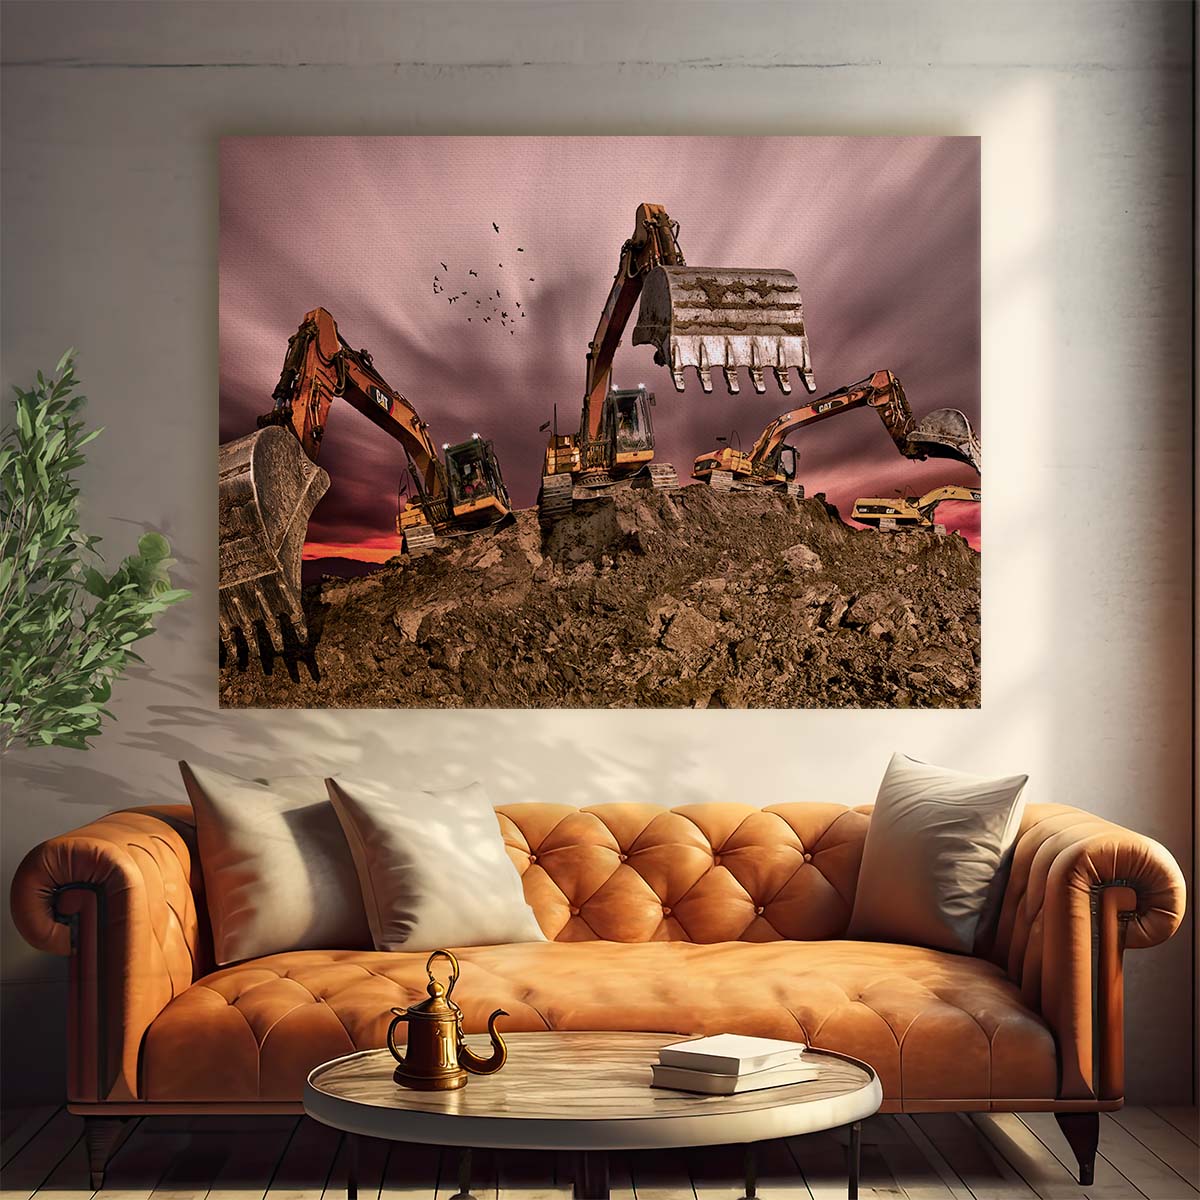 Dramatic Excavator Digging at Dusk Construction Wall Art by Luxuriance Designs. Made in USA.